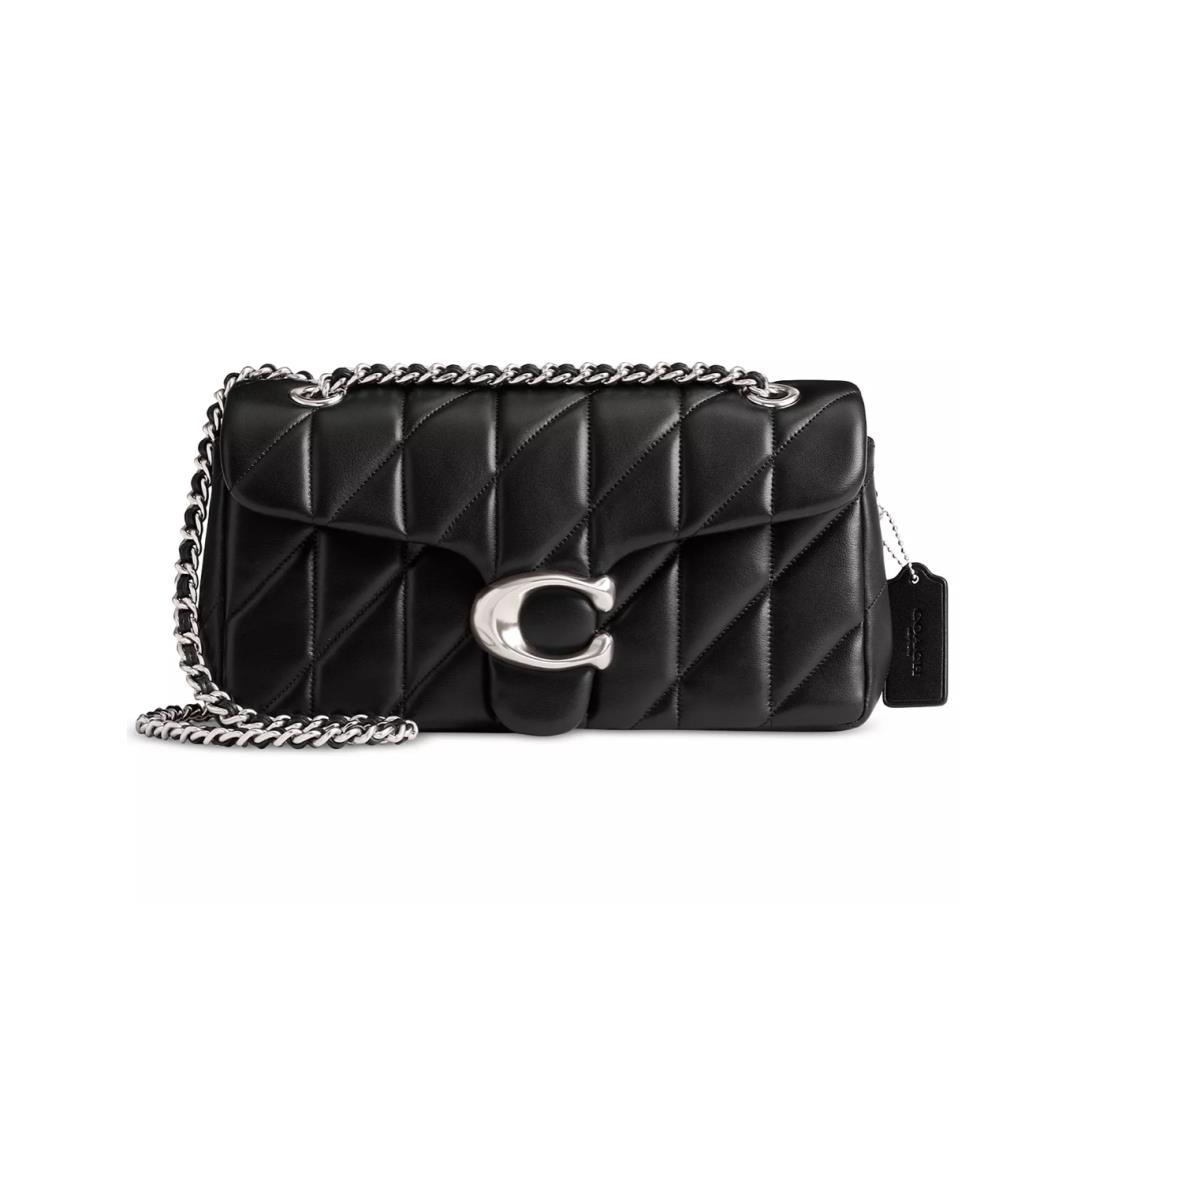 Coach Tabby Small Quilted Leather Shoulder Bag 26 Lh/black - Exterior: LH/BLACK